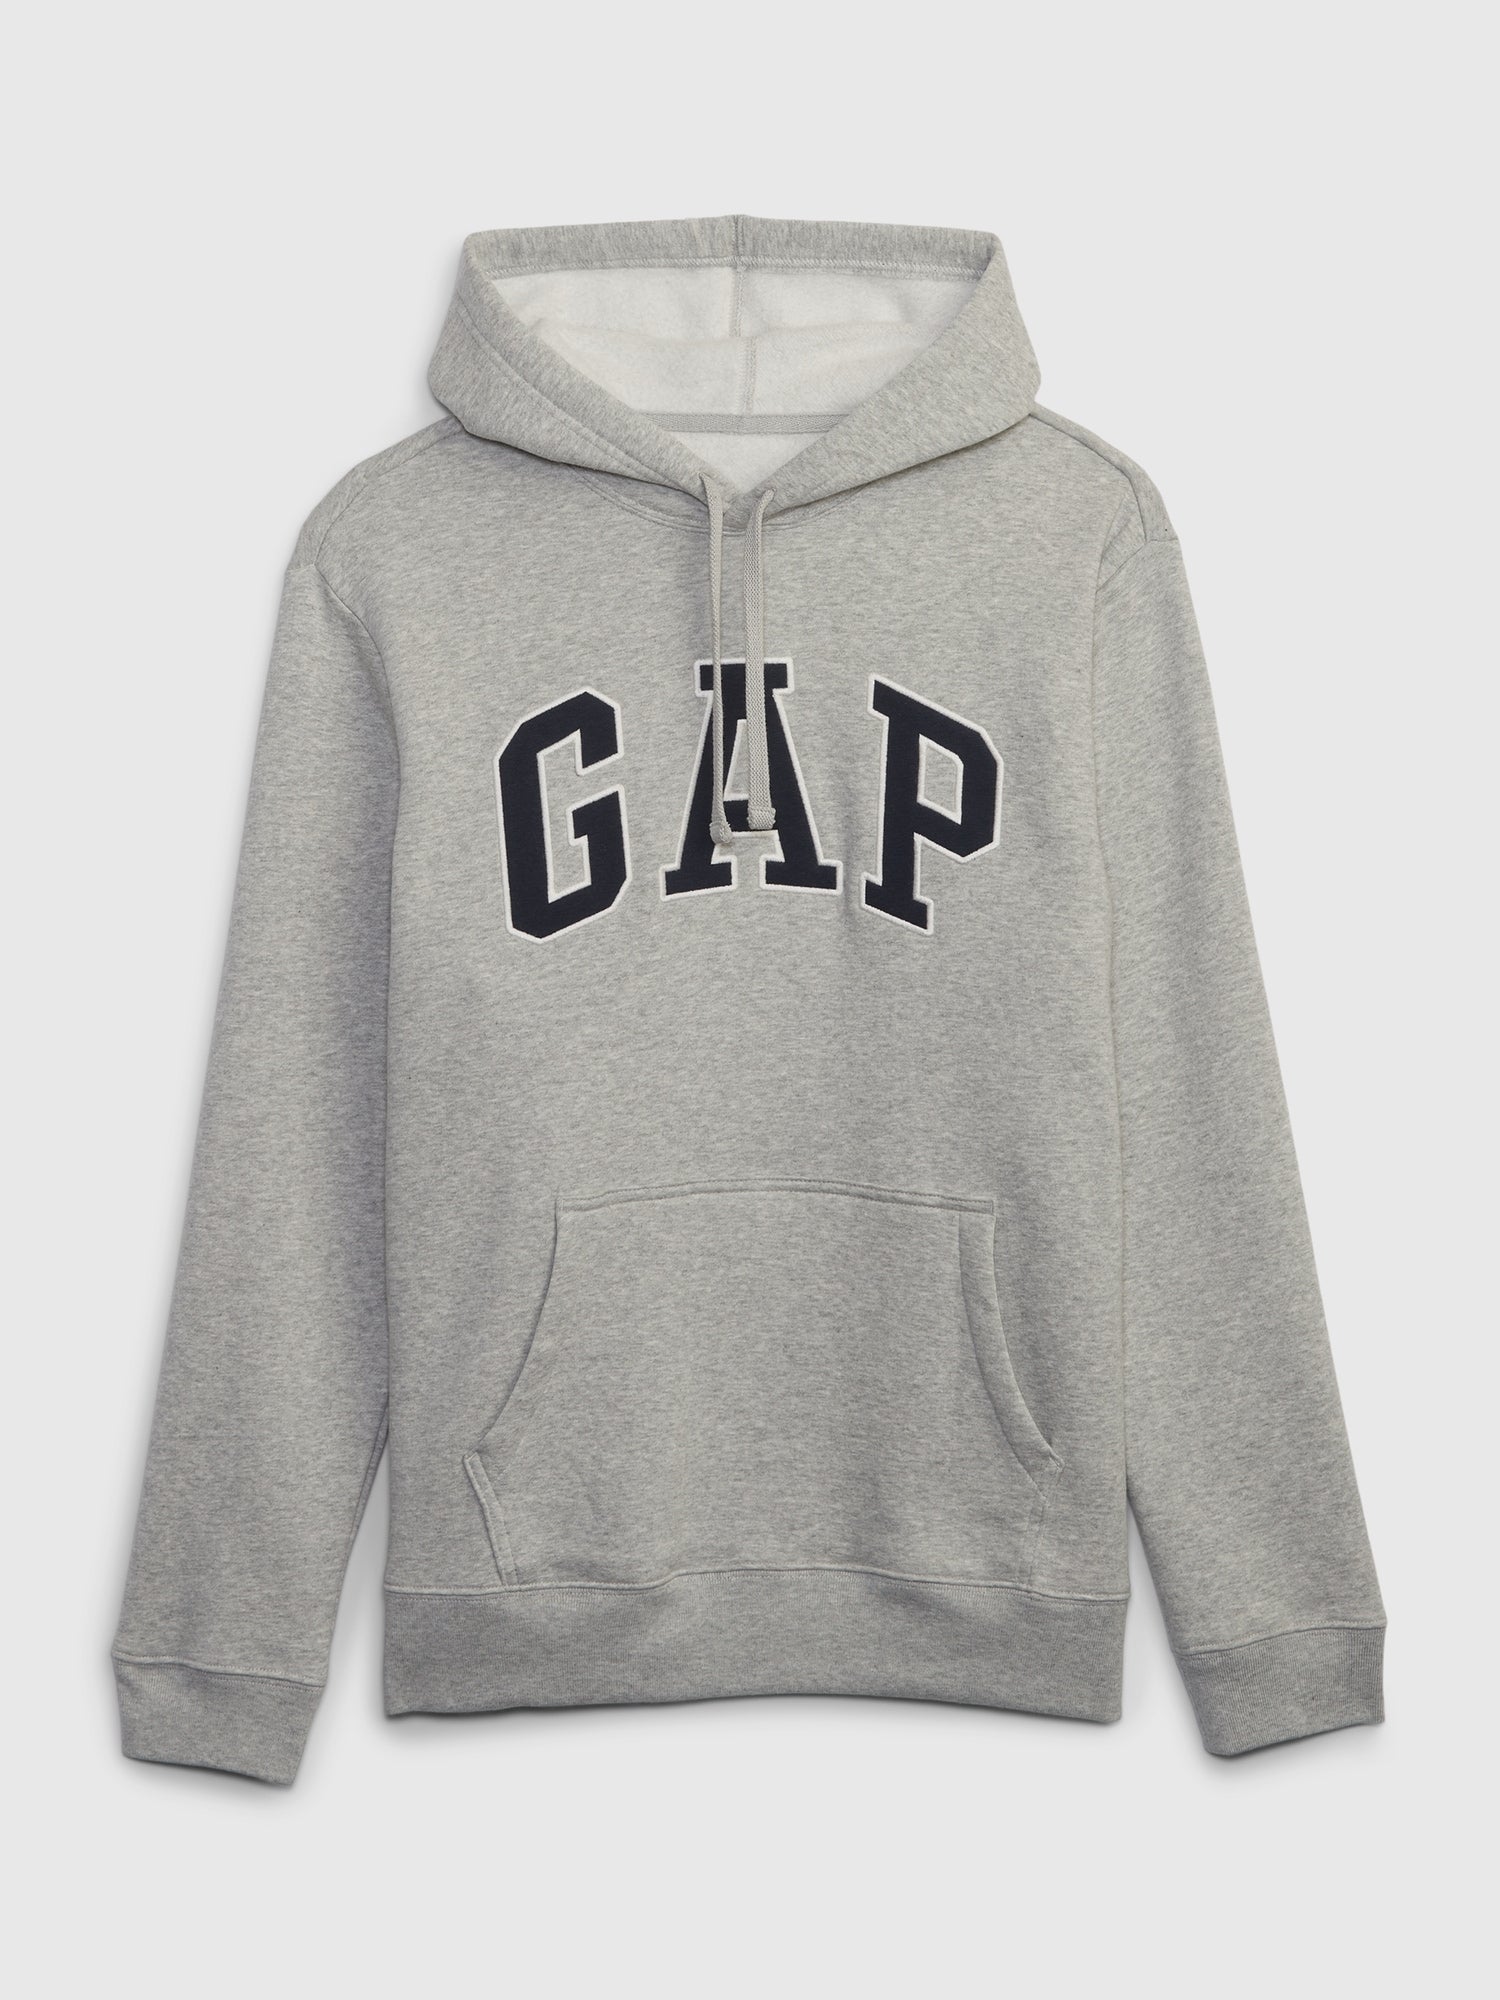 How Much Are Gap Sweaters?